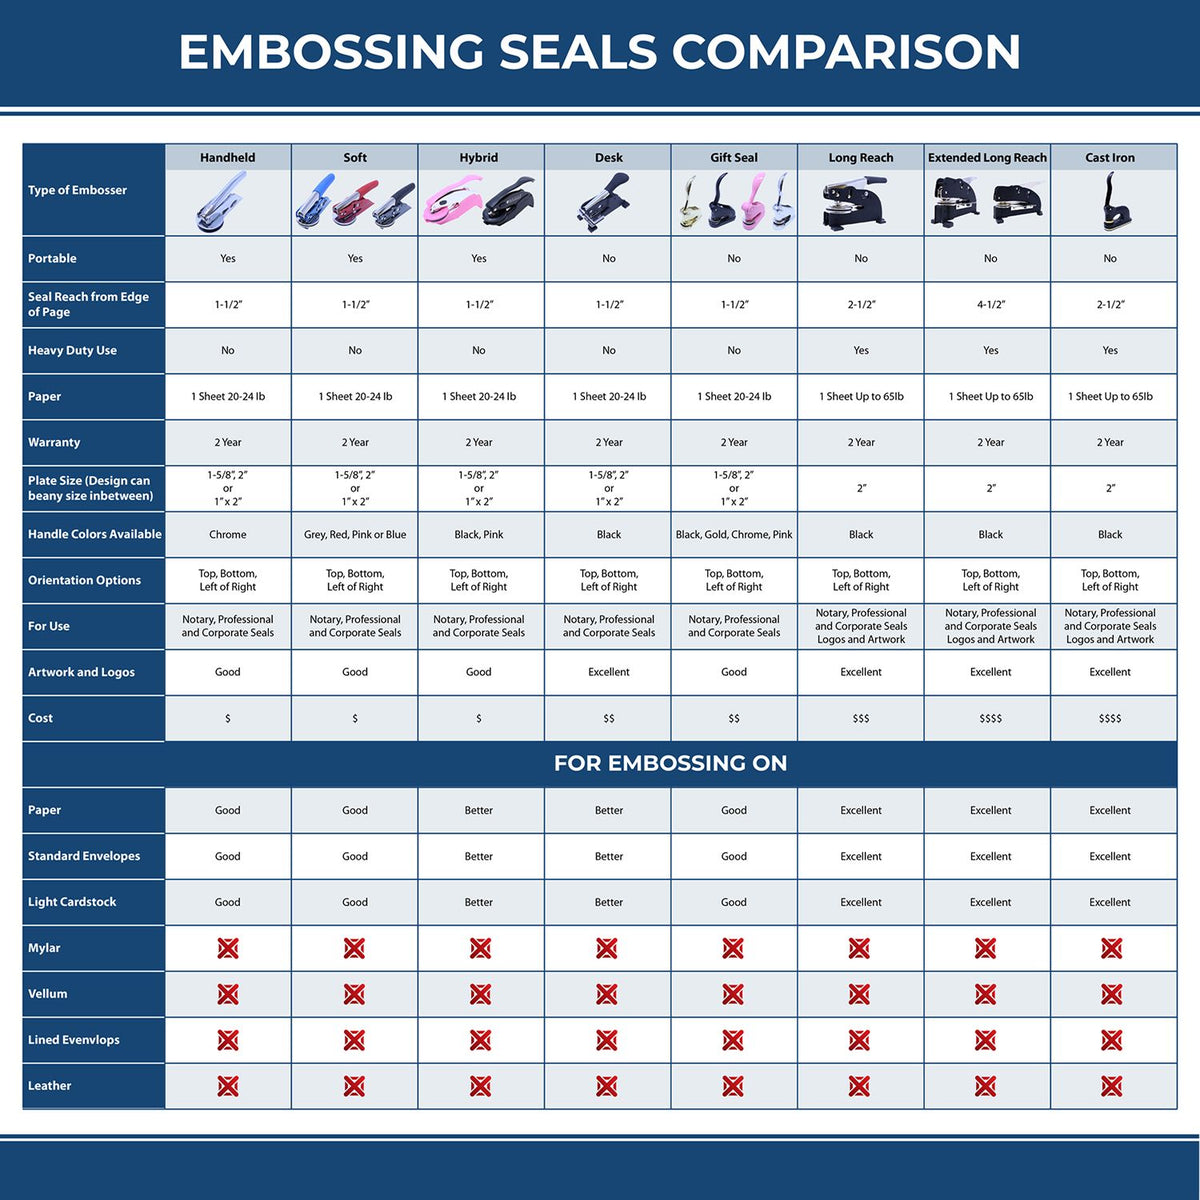 A comparison chart for the different types of mount models available for the Soft Virginia Professional Engineer Seal.